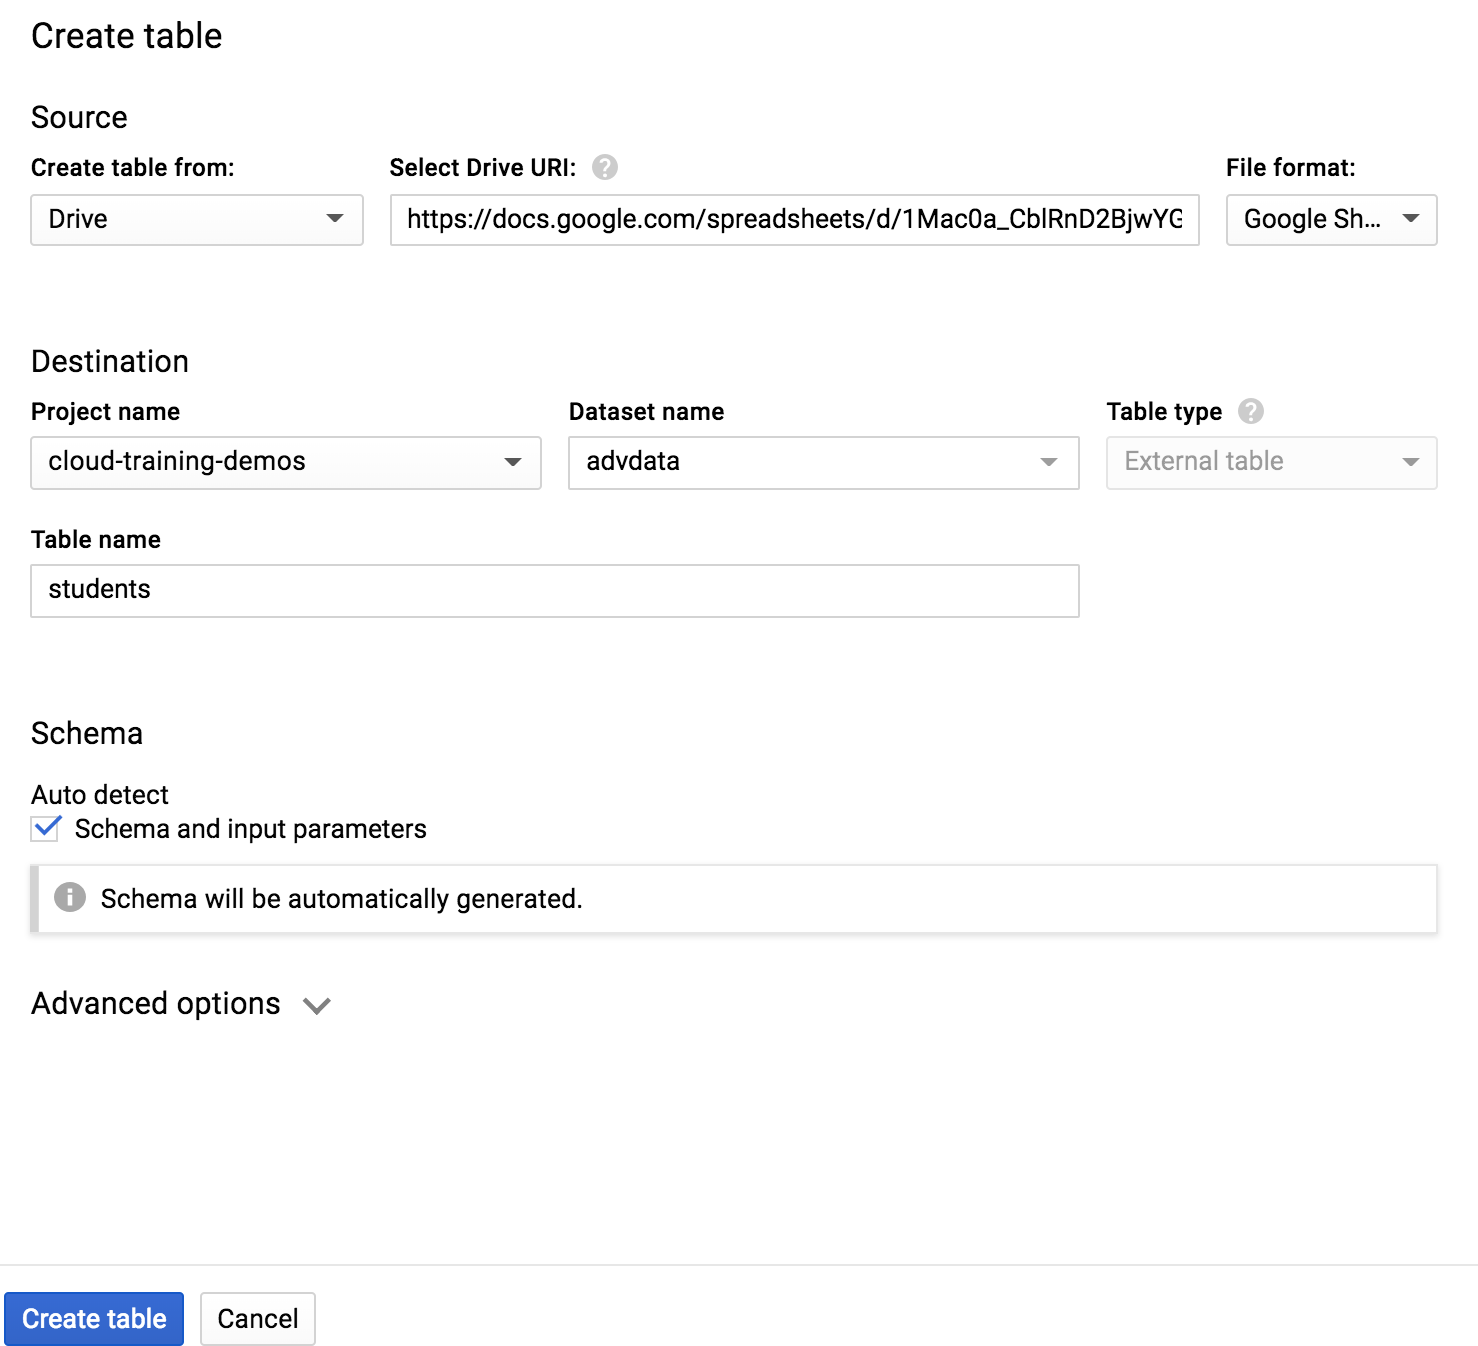 The “Create table” dialog box allows you to specify that the external data source is Google Sheets.